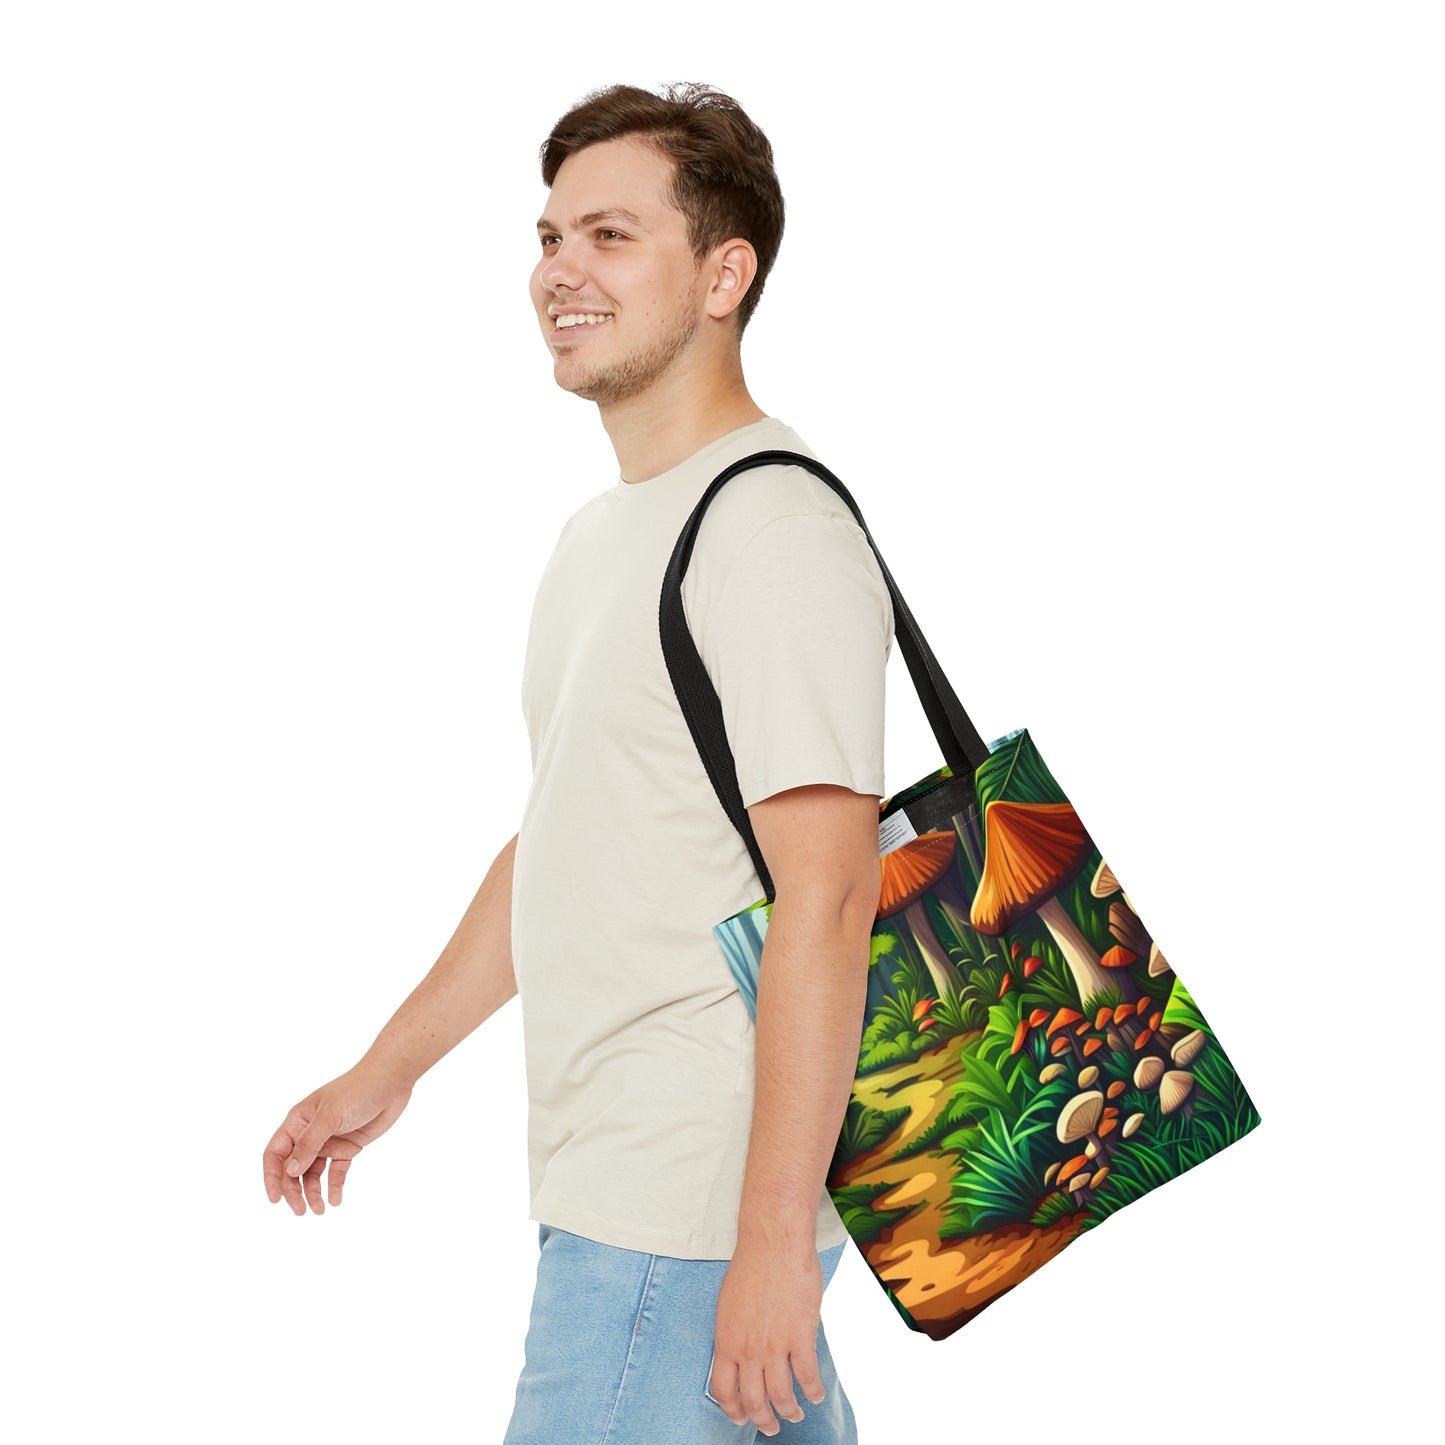 Colorful forest mushrooms Tote Bag in 3 sizes to meet your needs.